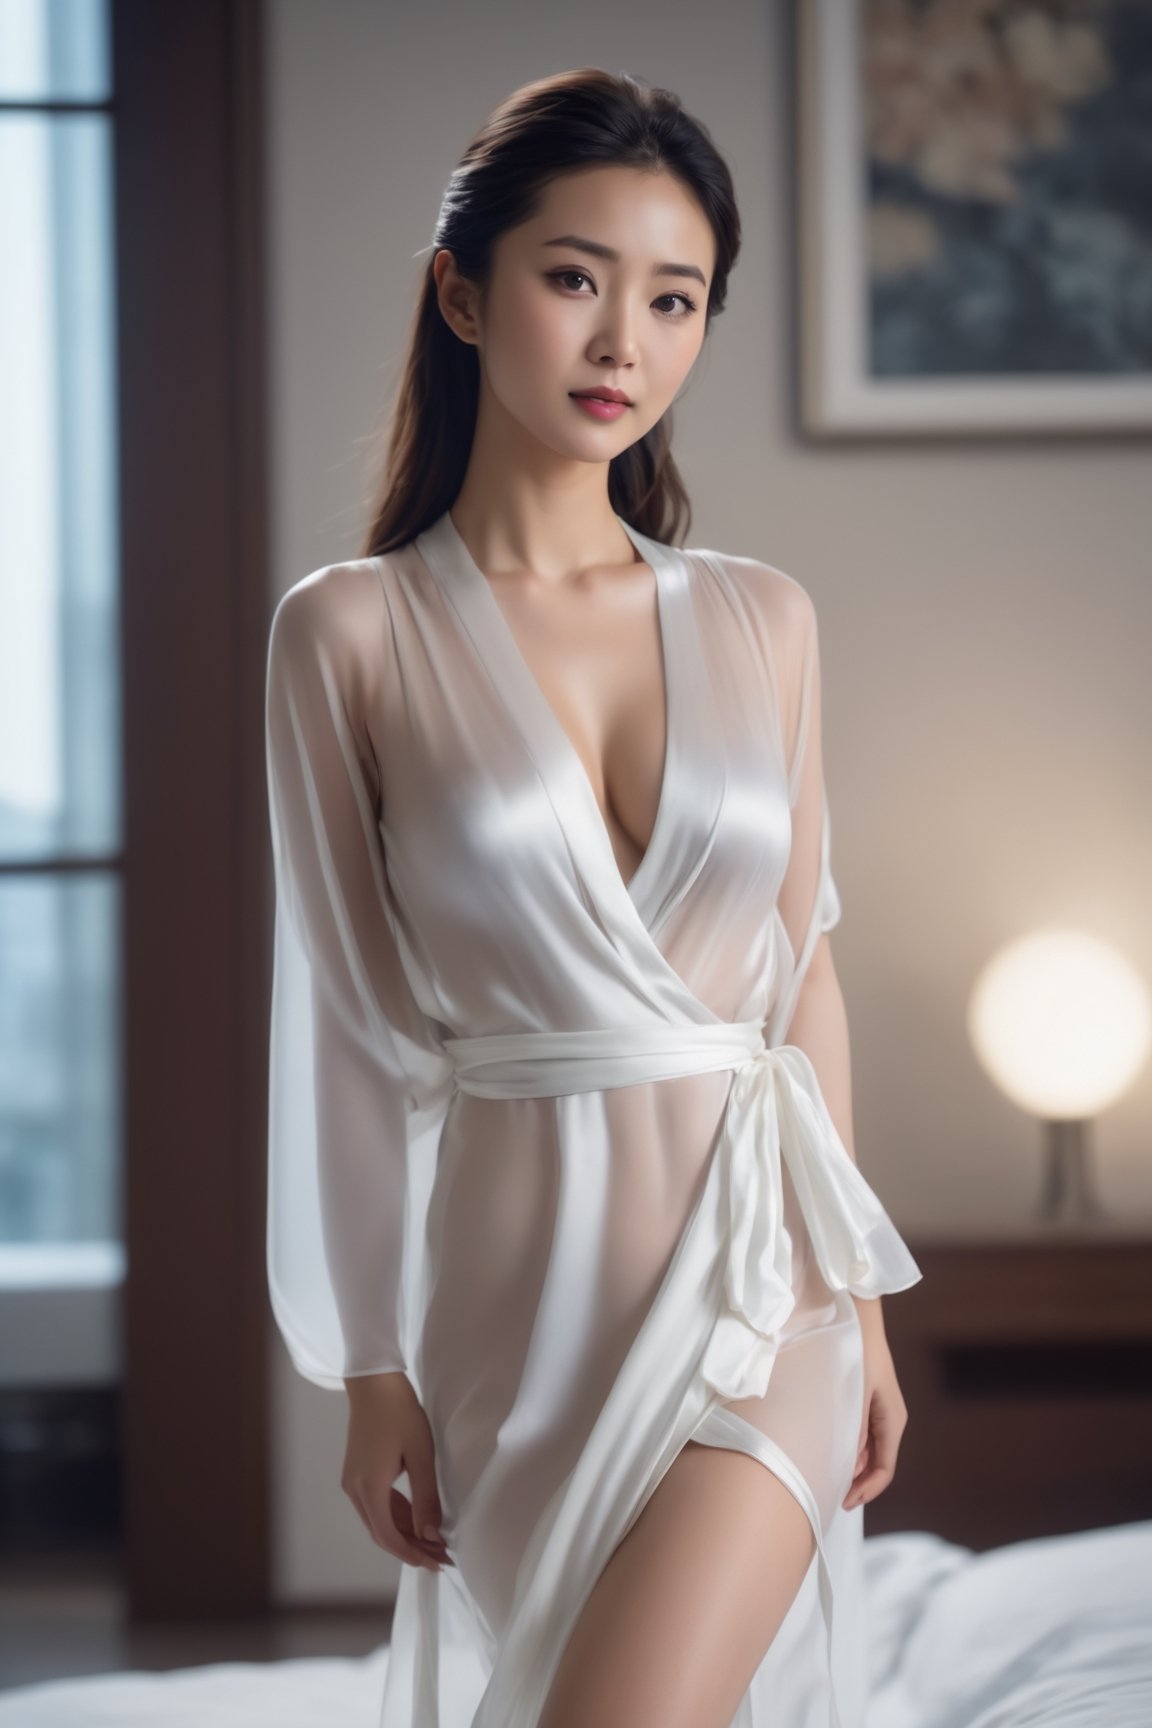 Closeup portrait, full-body shot,4k,28 years old Chinese lady wearing wrap dress in bedroom, 30 Pinterest translucent dress styles, white silk sheer, art, cinematic atmosphere, panoramic, feminine, cleavage, perfect breasts, no panties